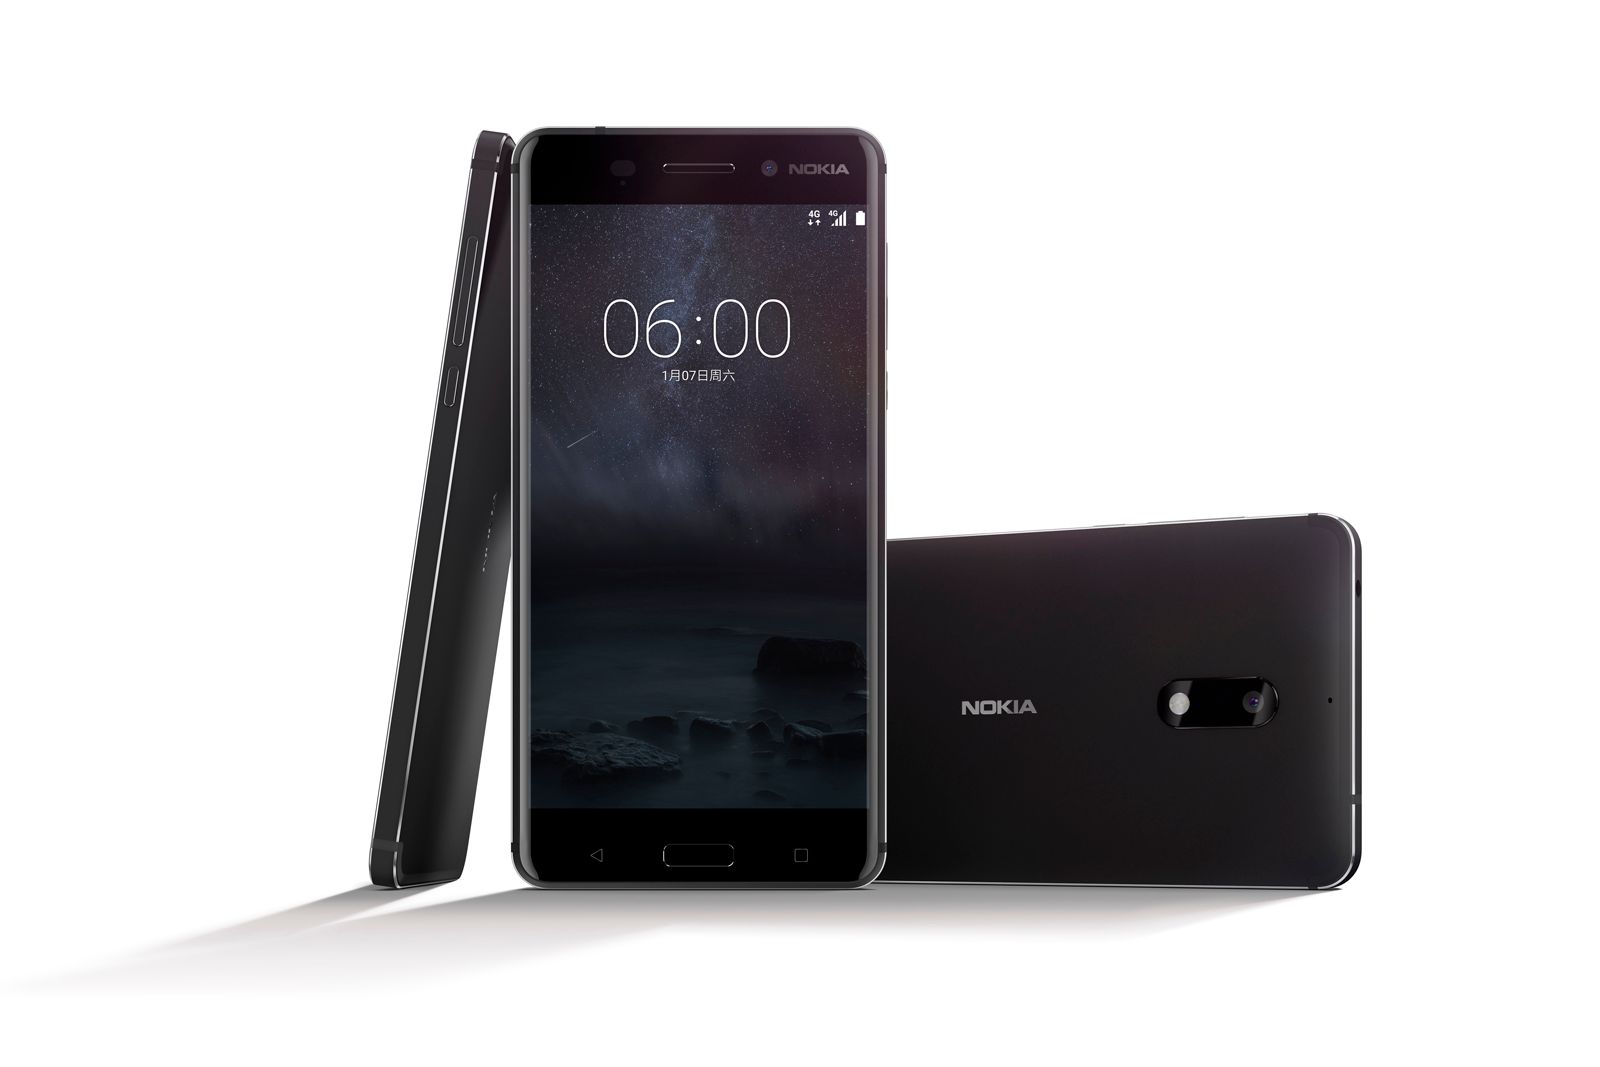 nokia has more announcements on 26 february a day before mwc image 1